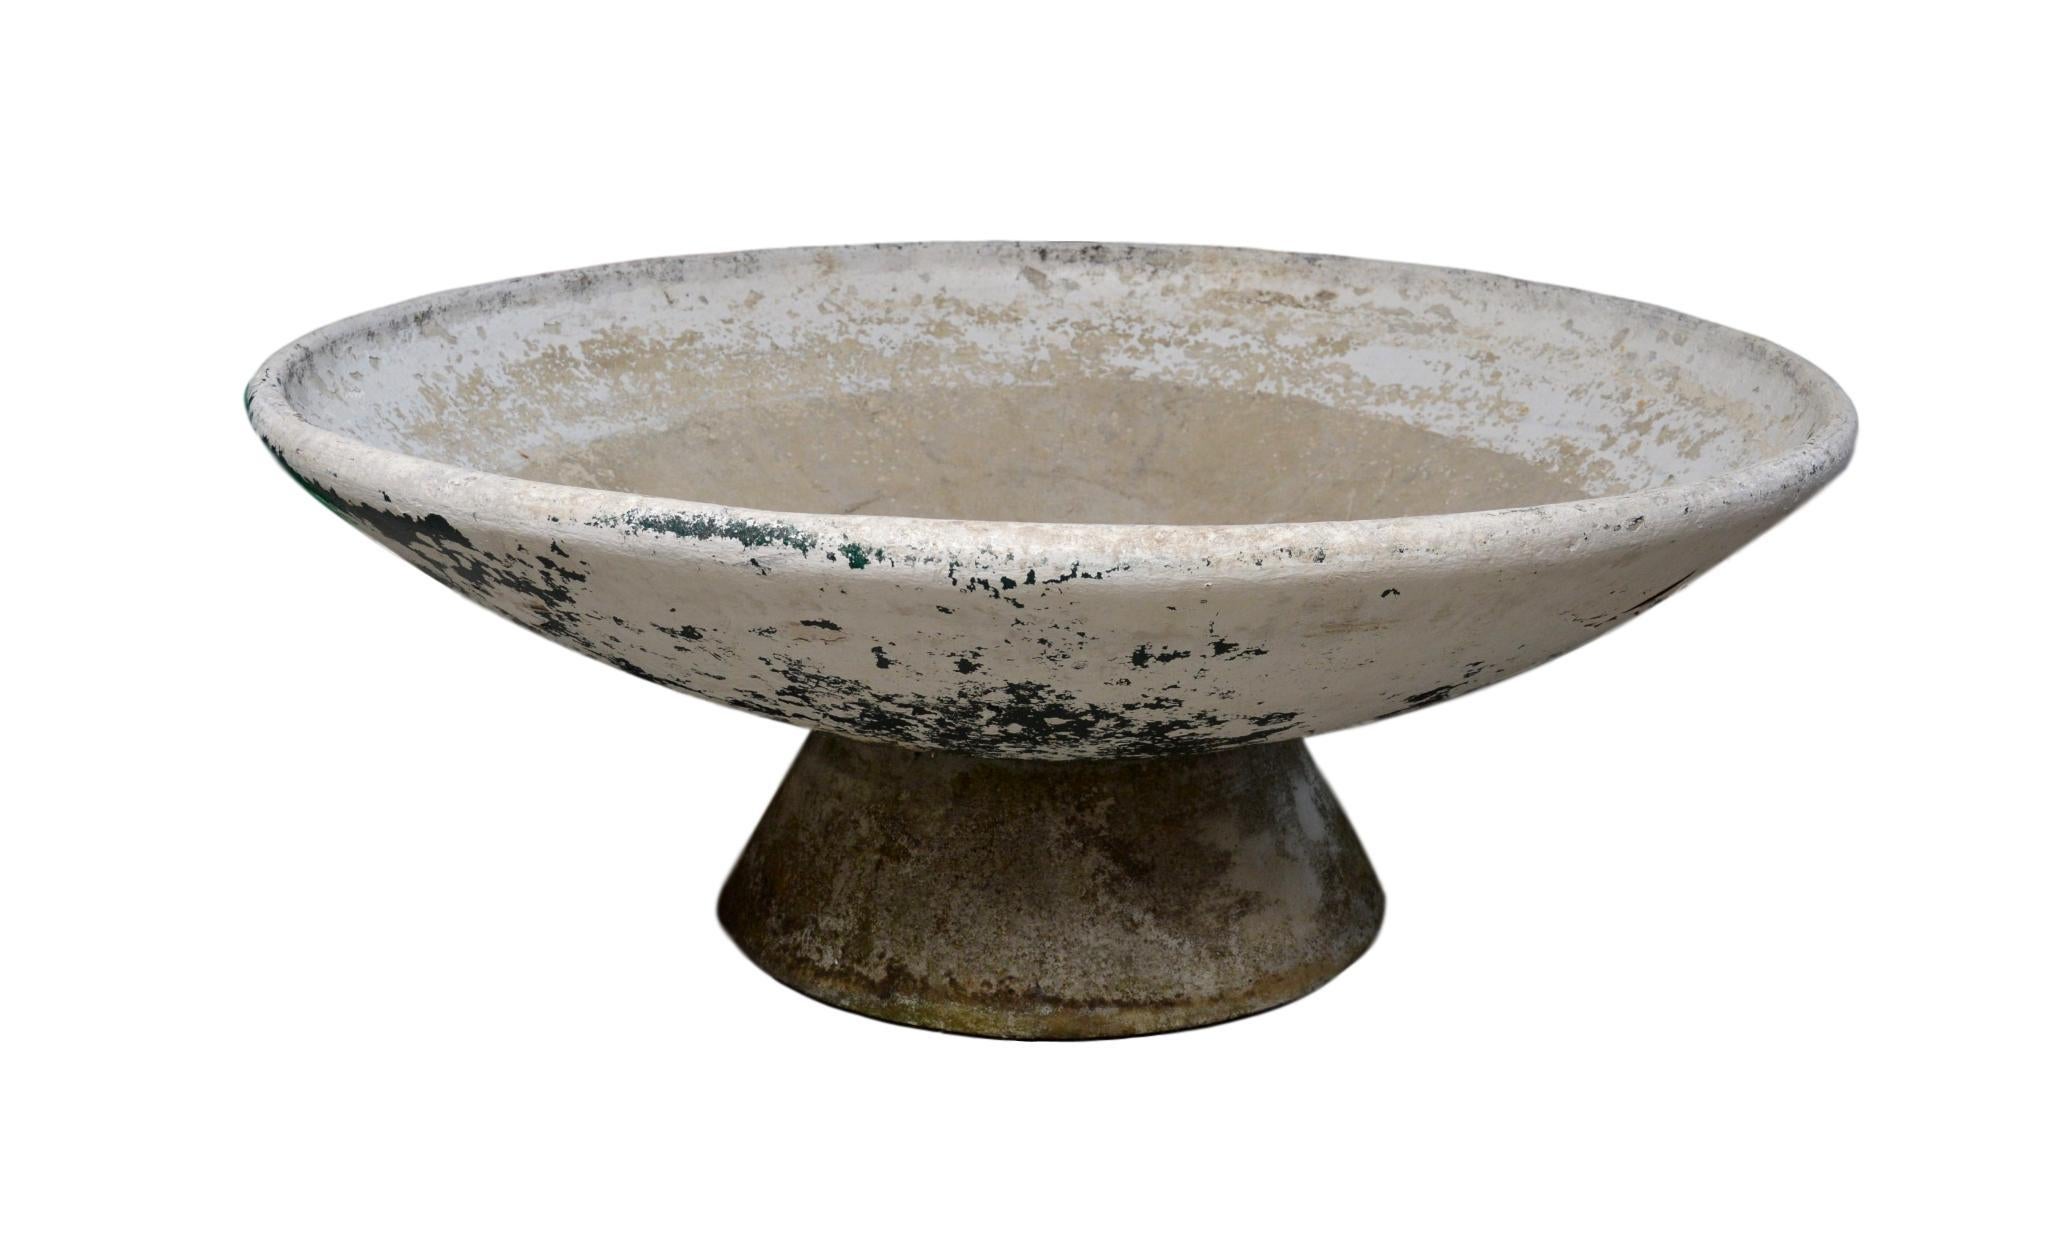 Fantastic cement planter by Swiss designer Willy Guhl for Eternit. Concrete pedestal base with massive concrete bowl that sits on top. Bowl can sit flat or angled in a multitude of directions. Great original patina. Great for indoors or